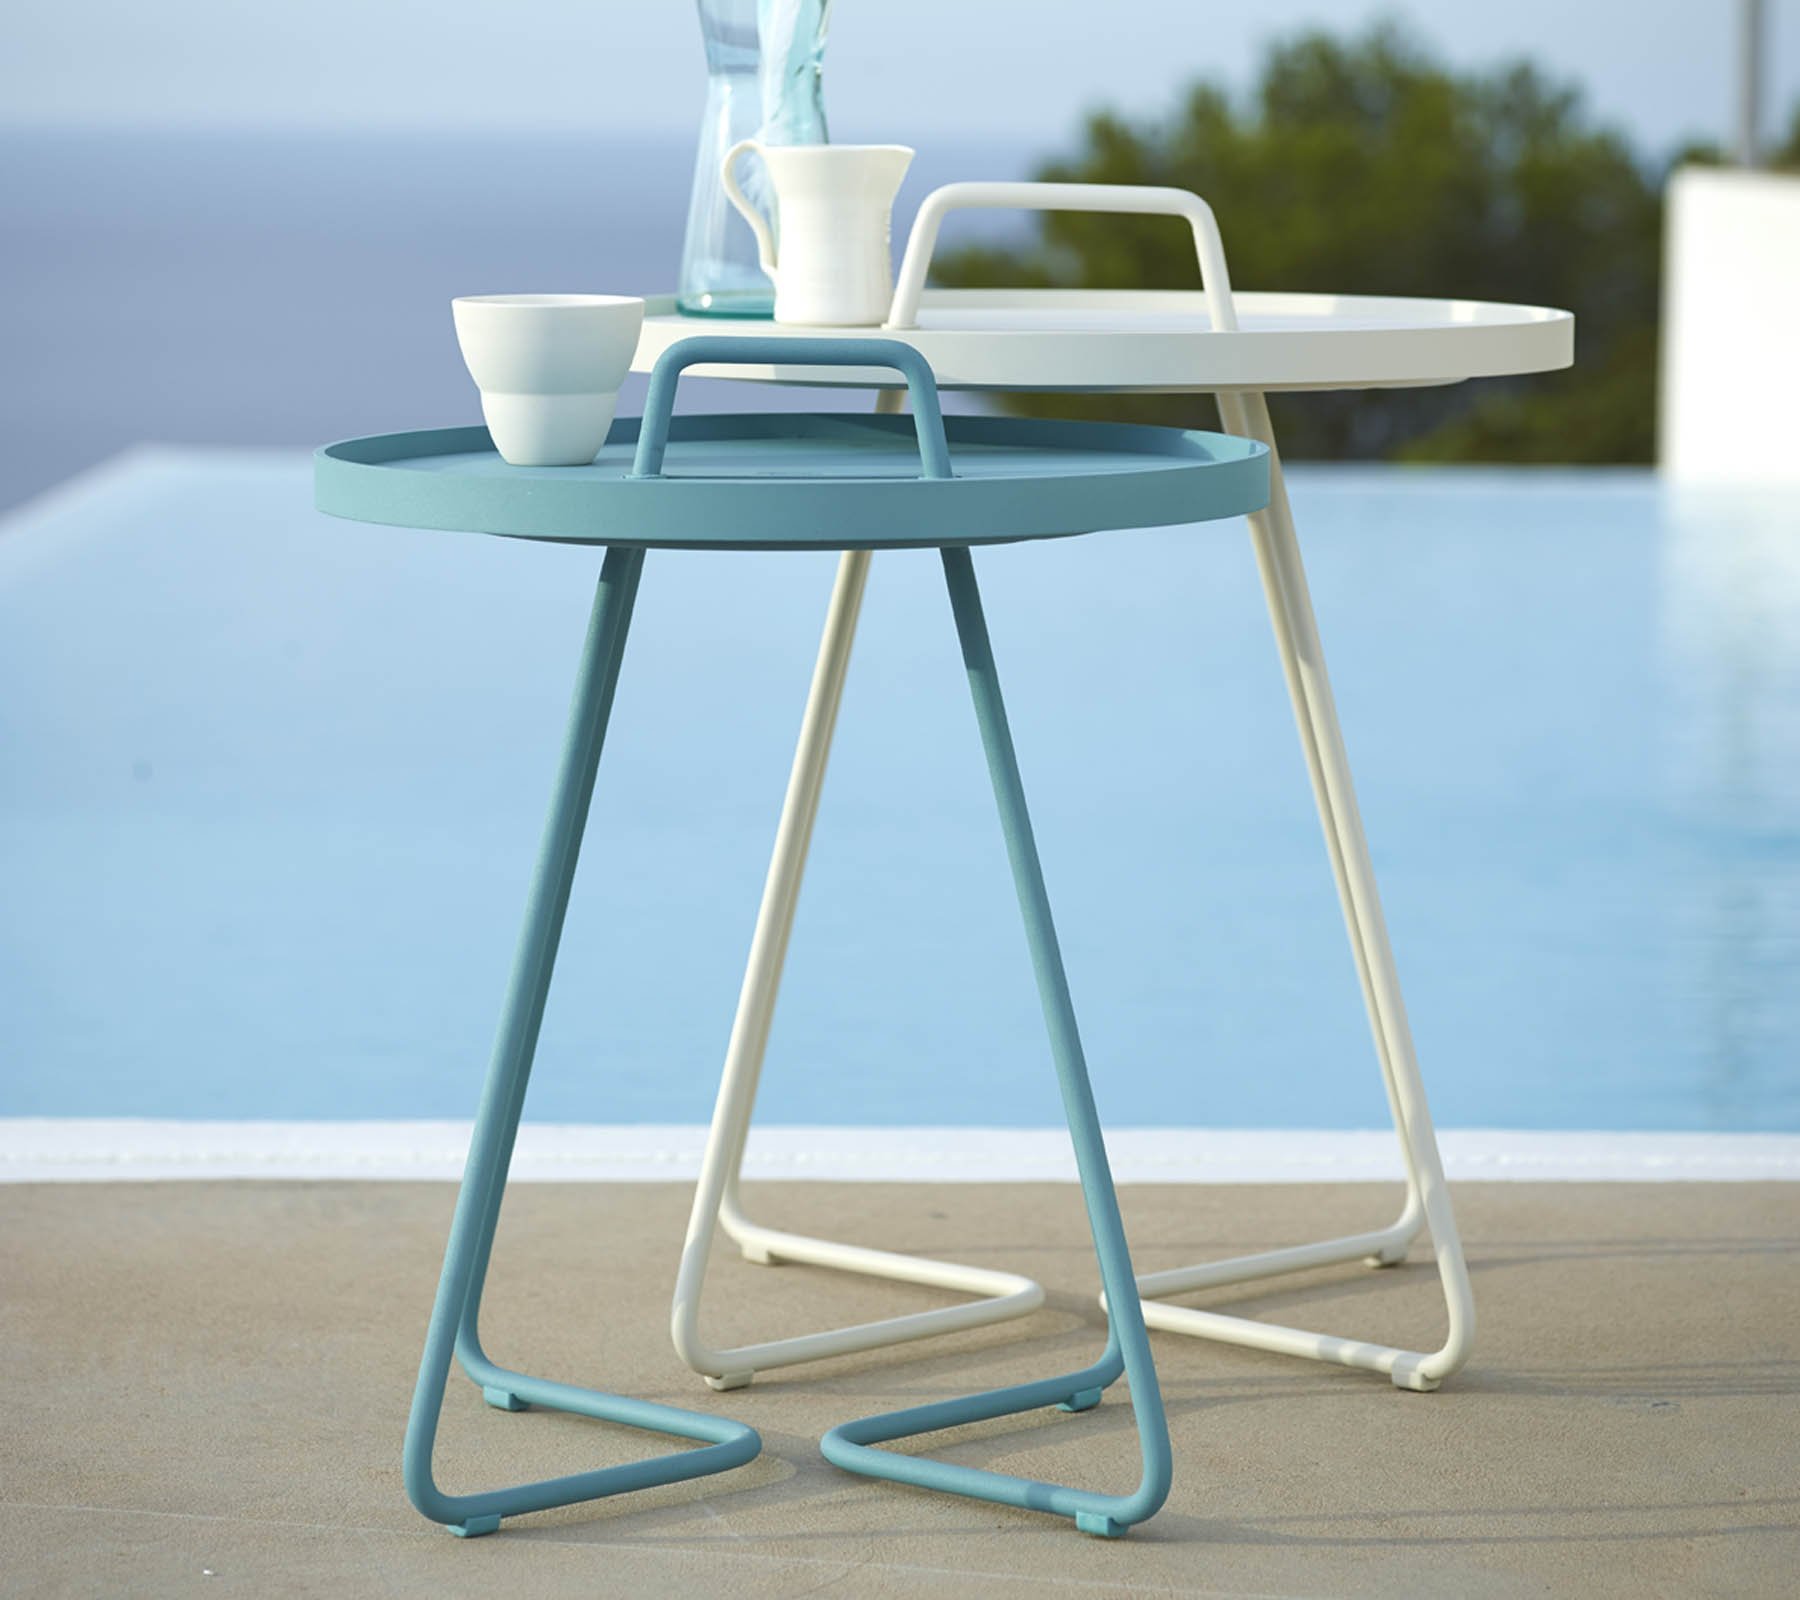 On the Move Side Table end from Cane-line, designed by Strand+Hvass